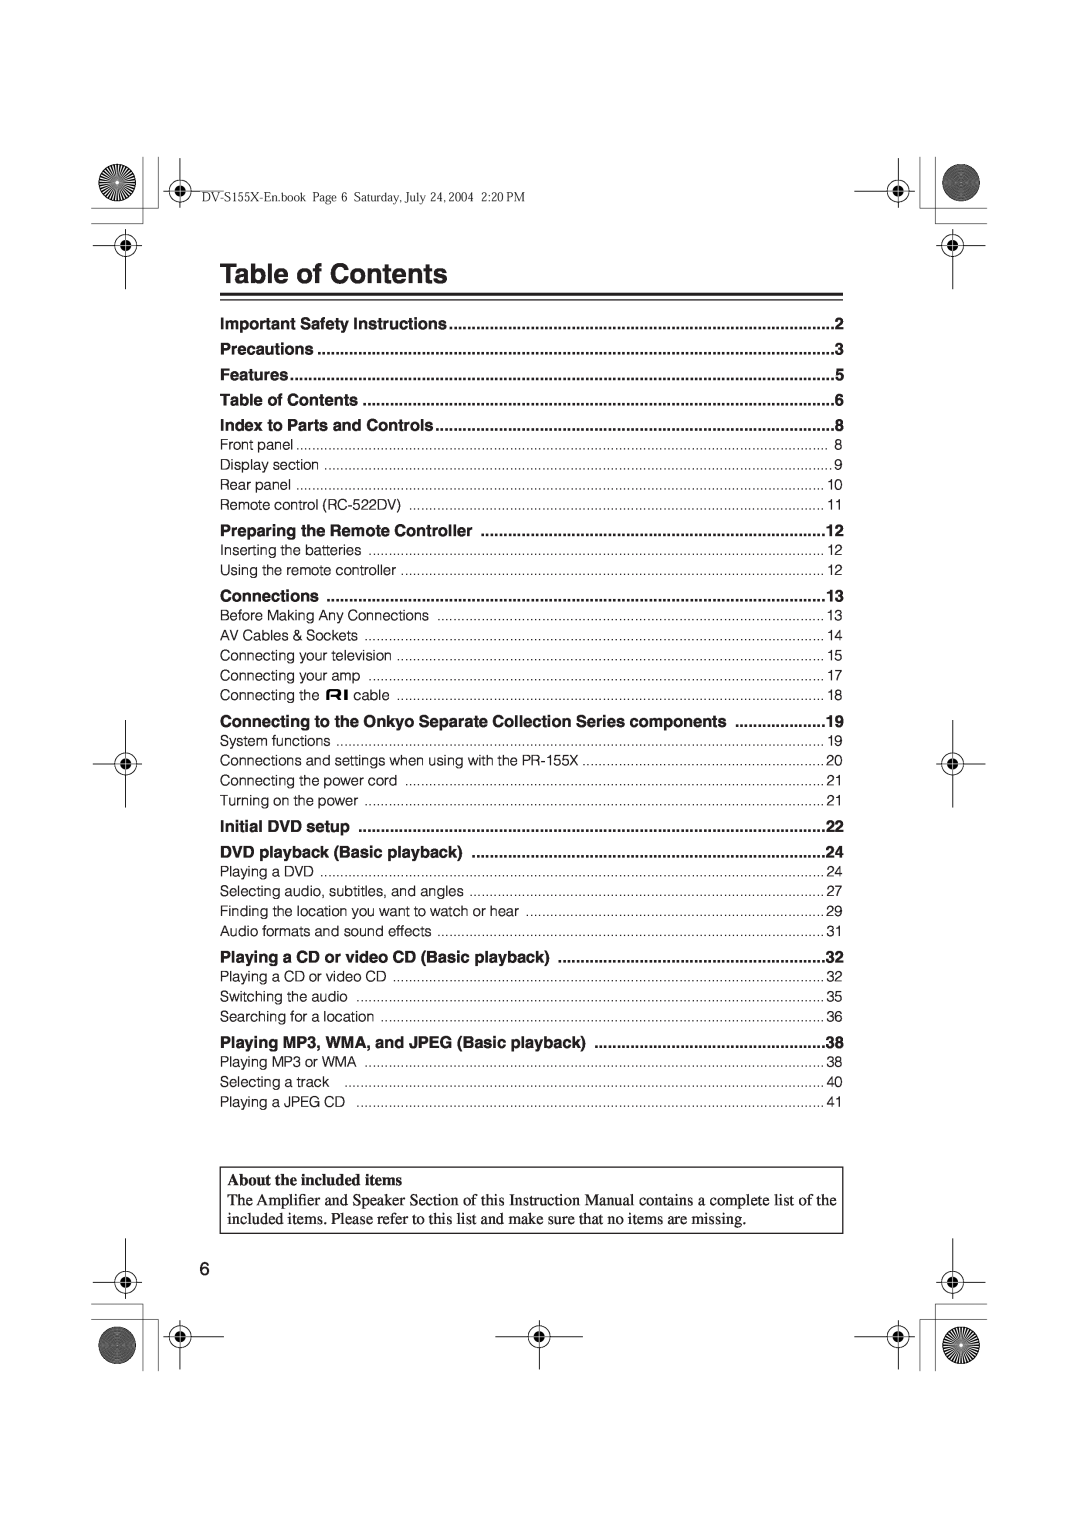 Onkyo HTP-V10X Table of Contents, Important Safety Instructions, Precautions, Features, Index to Parts and Controls 